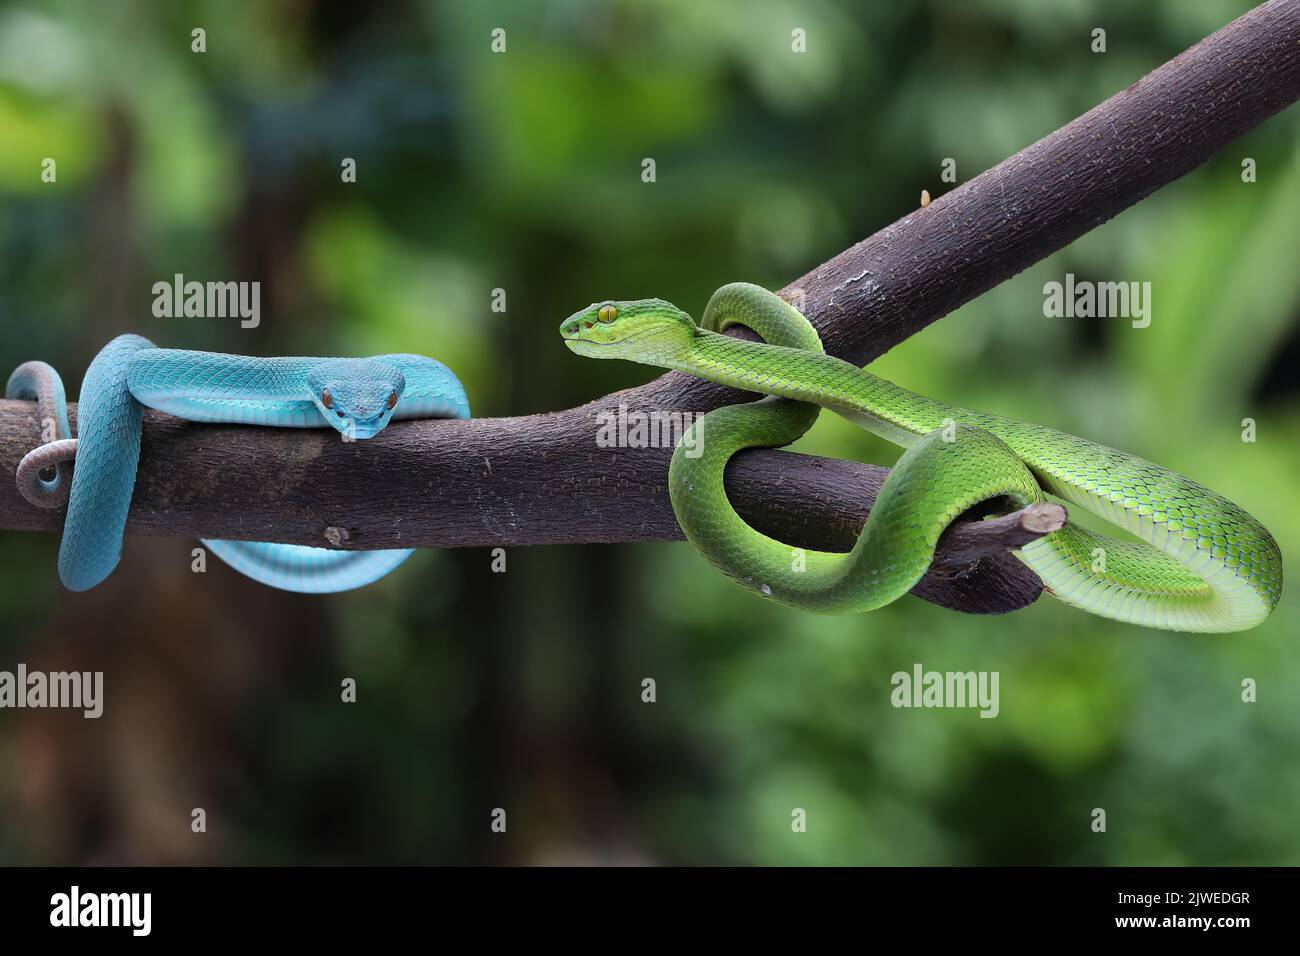 Blue insularis and green Trimeresurus albolabris snakes on a branch, Indonesia Stock Photo